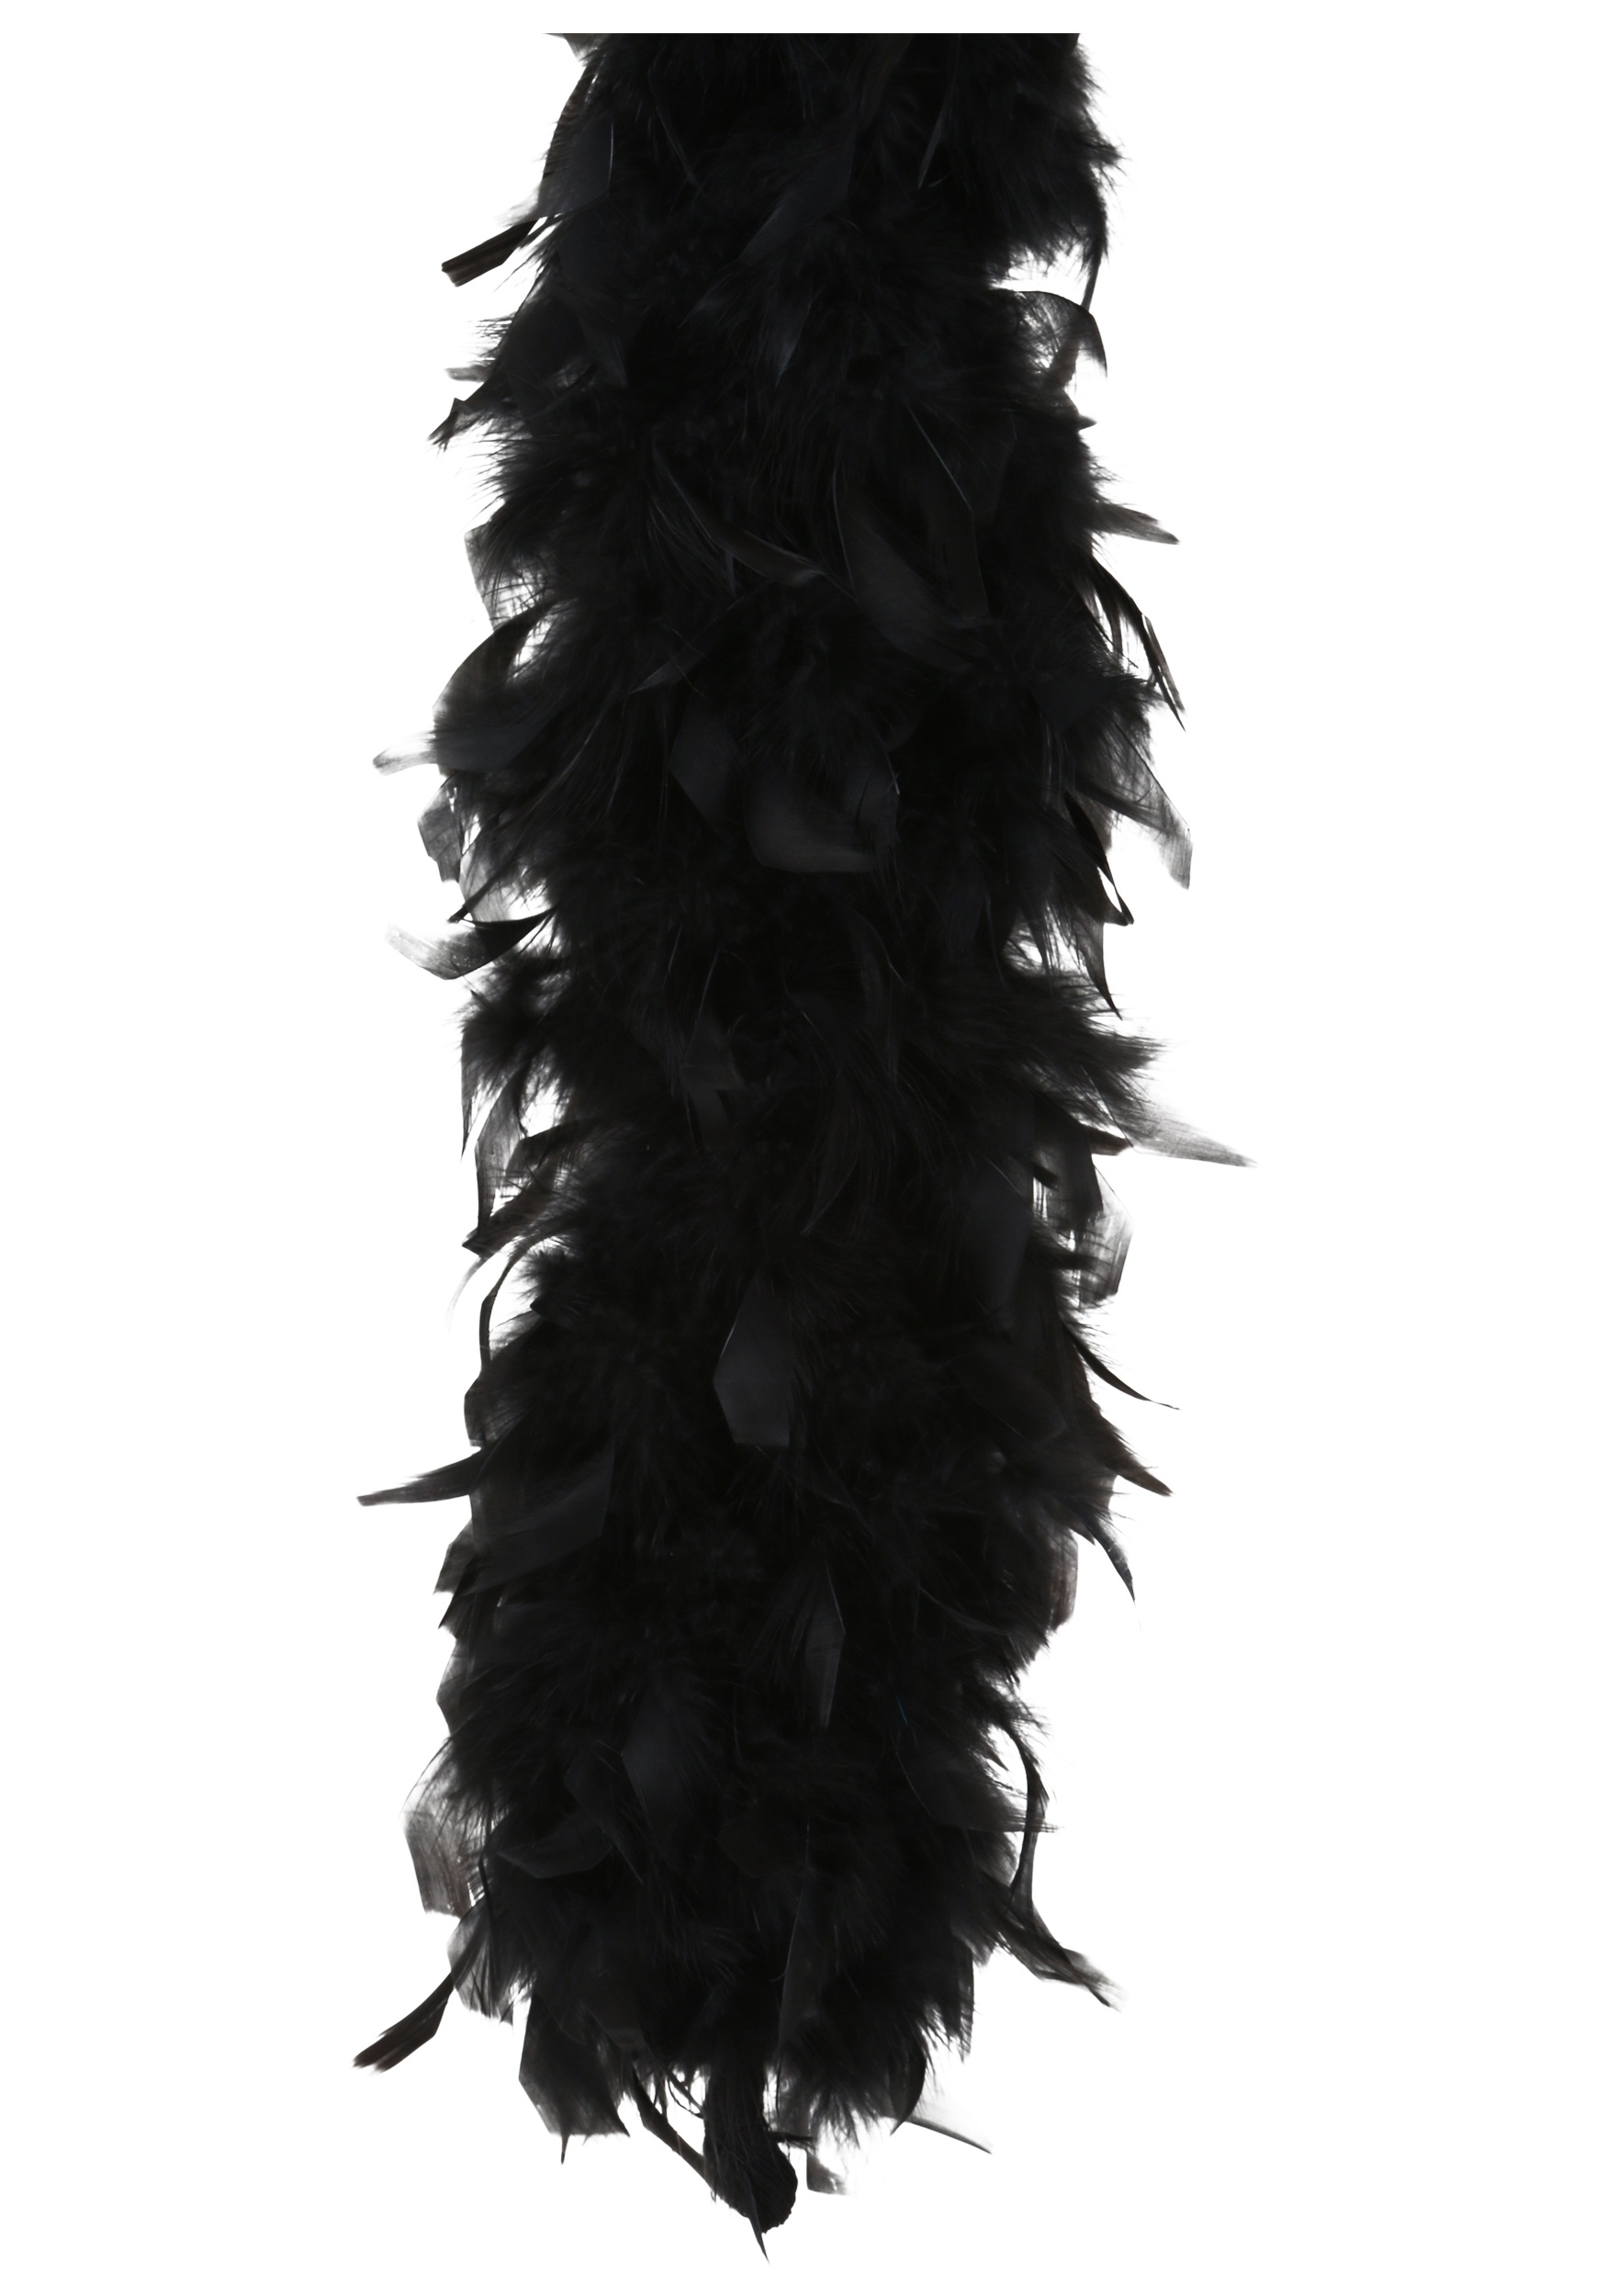 .com: Skeleteen Feather Boa Costume Accessory - 1920's White Boa with  Feathers - 1 Piece : Toys & Games